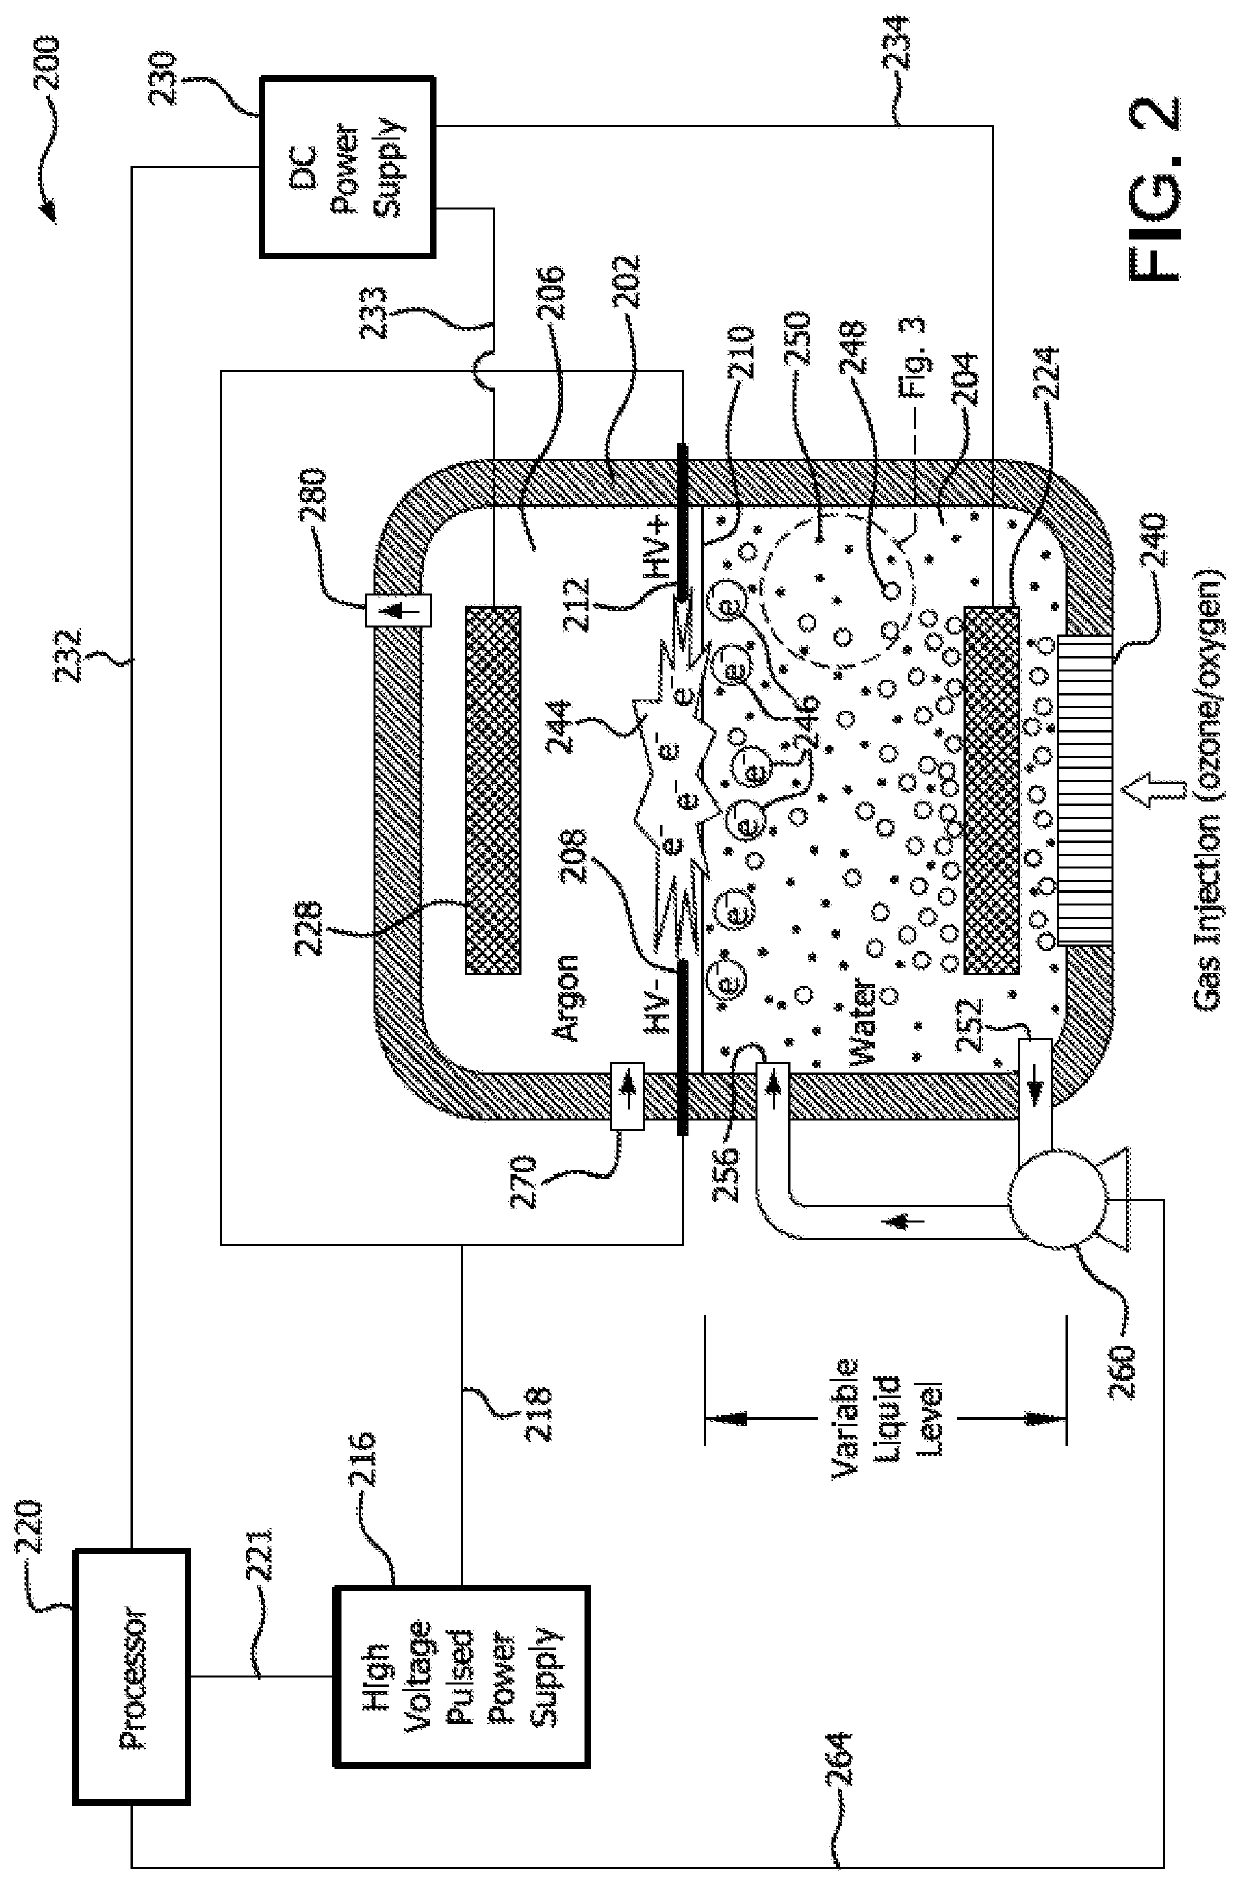 Gas/liquid plasma reactor with pulsed power supply and secondary direct current electrodes